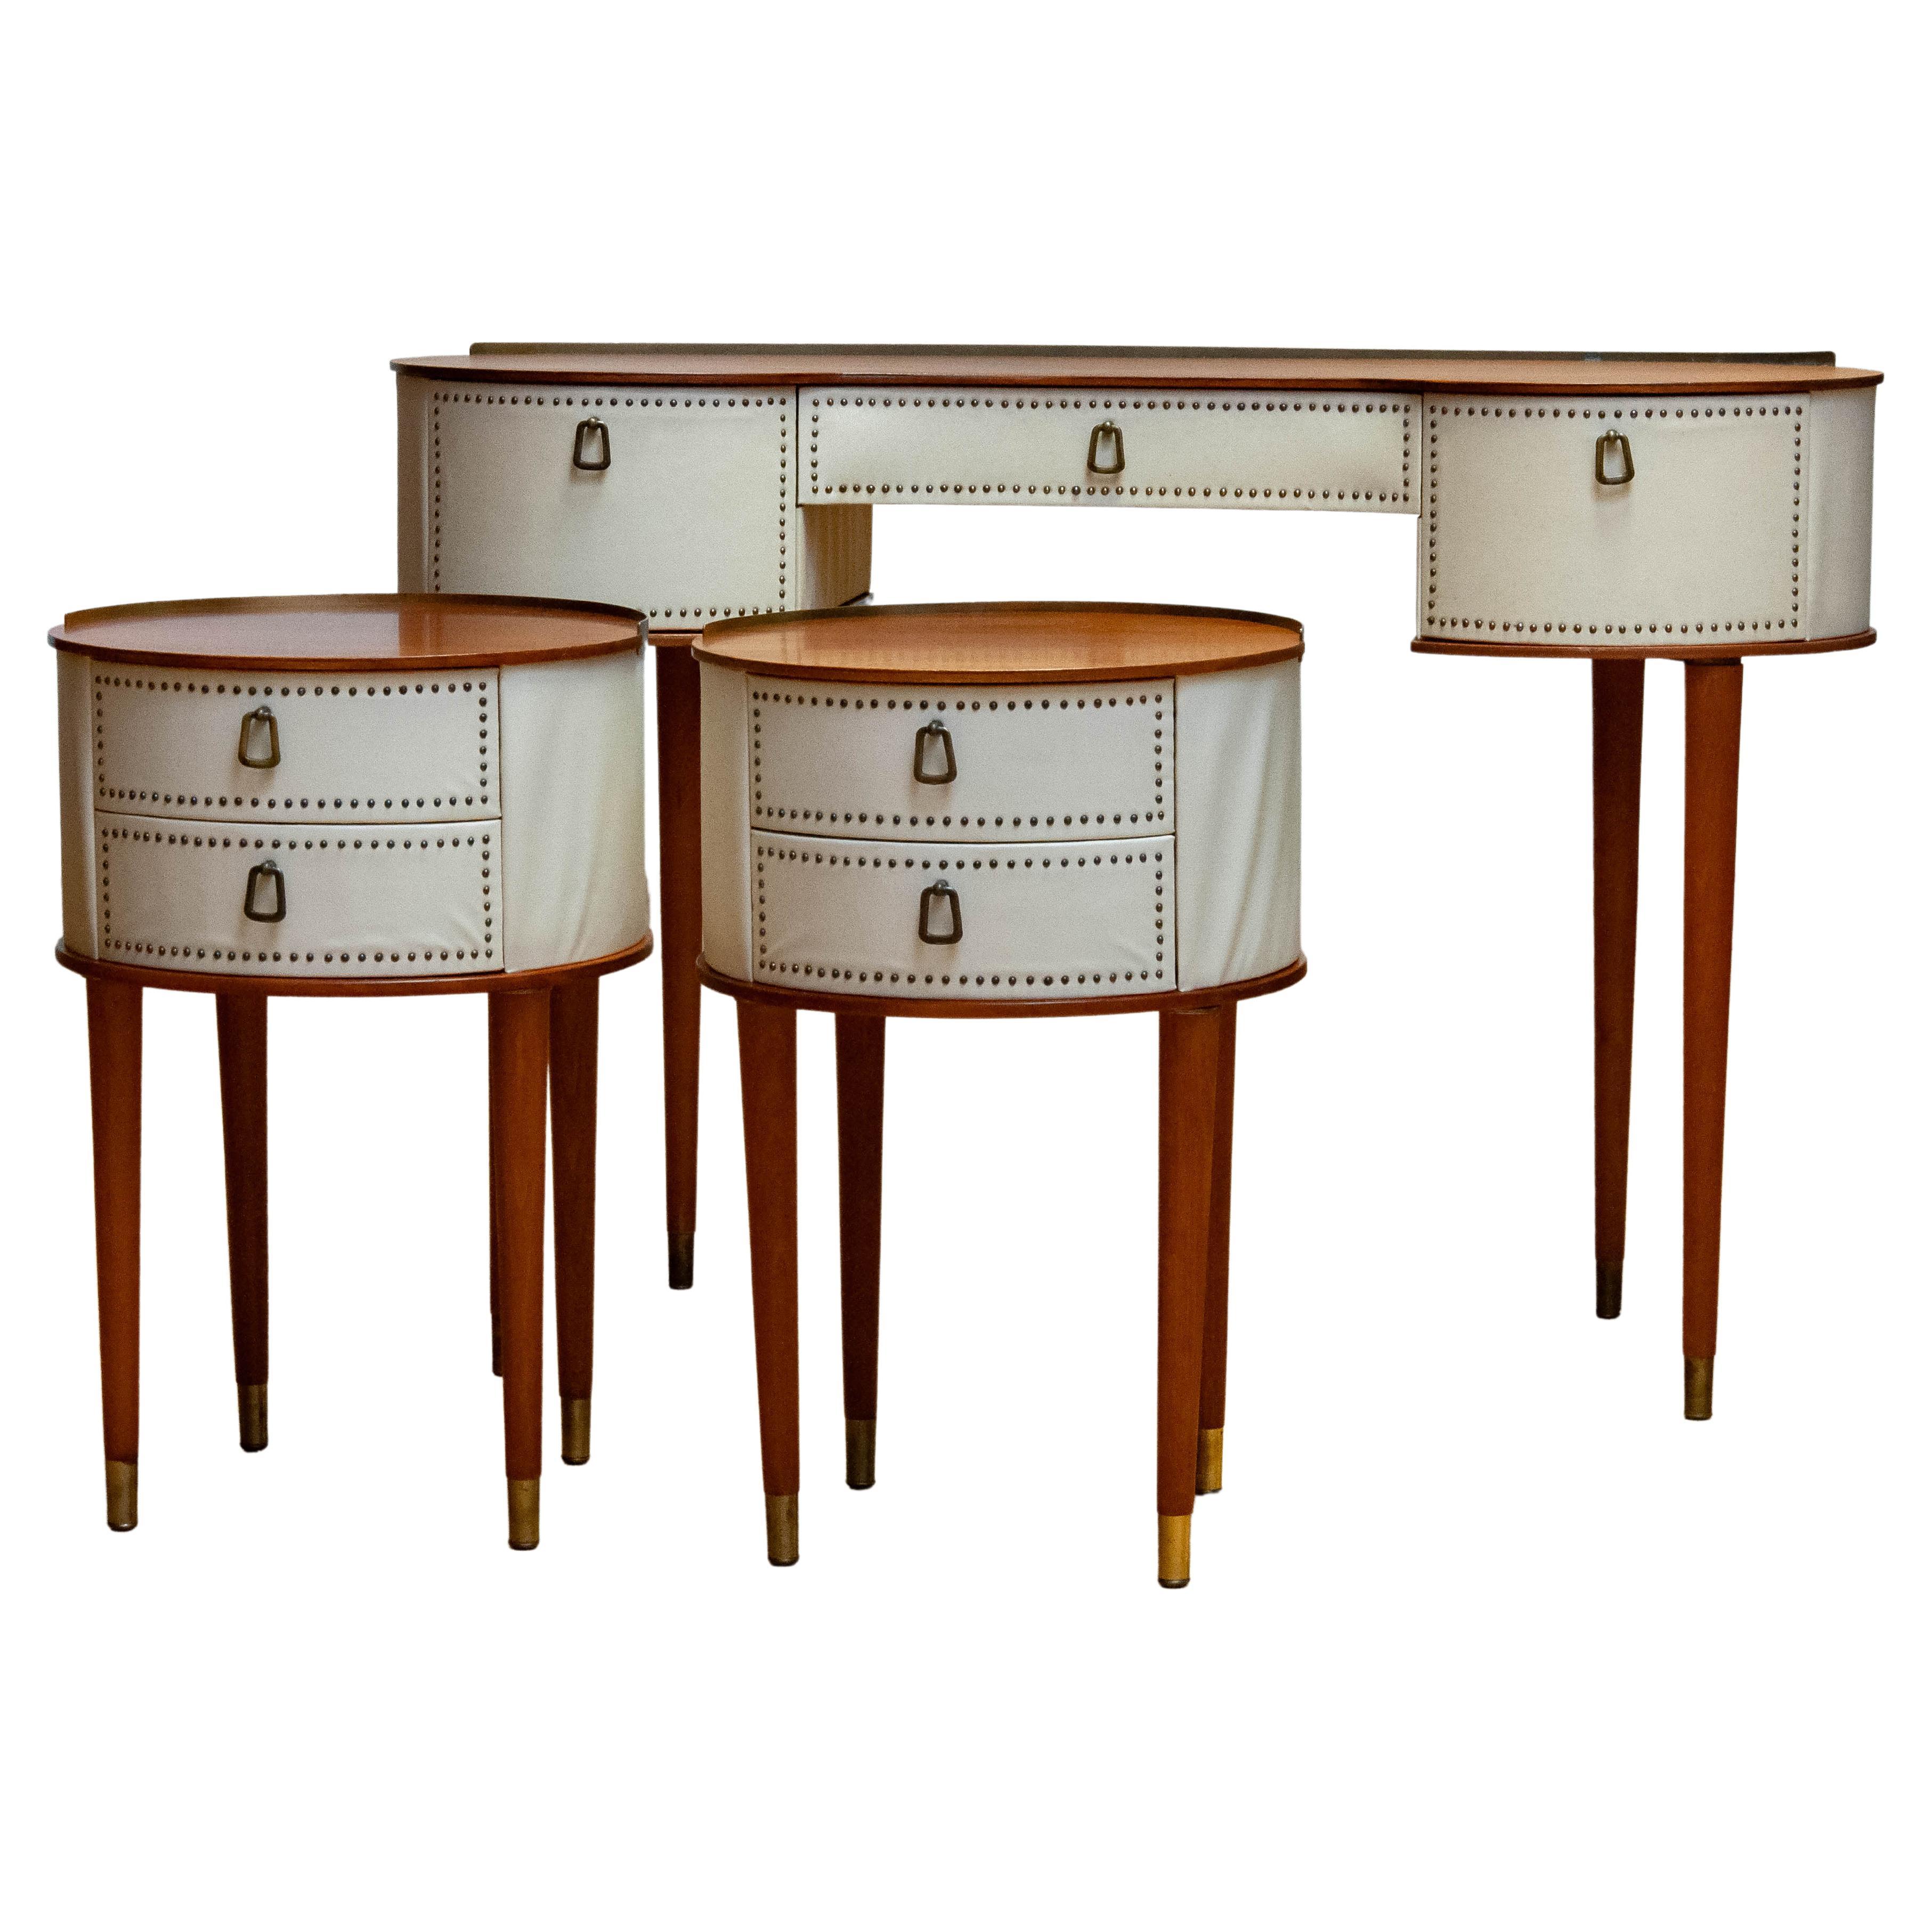 1950 Pair Nailed Night Stands With Matching Vanity By Halvdan Pettersson. Sweden